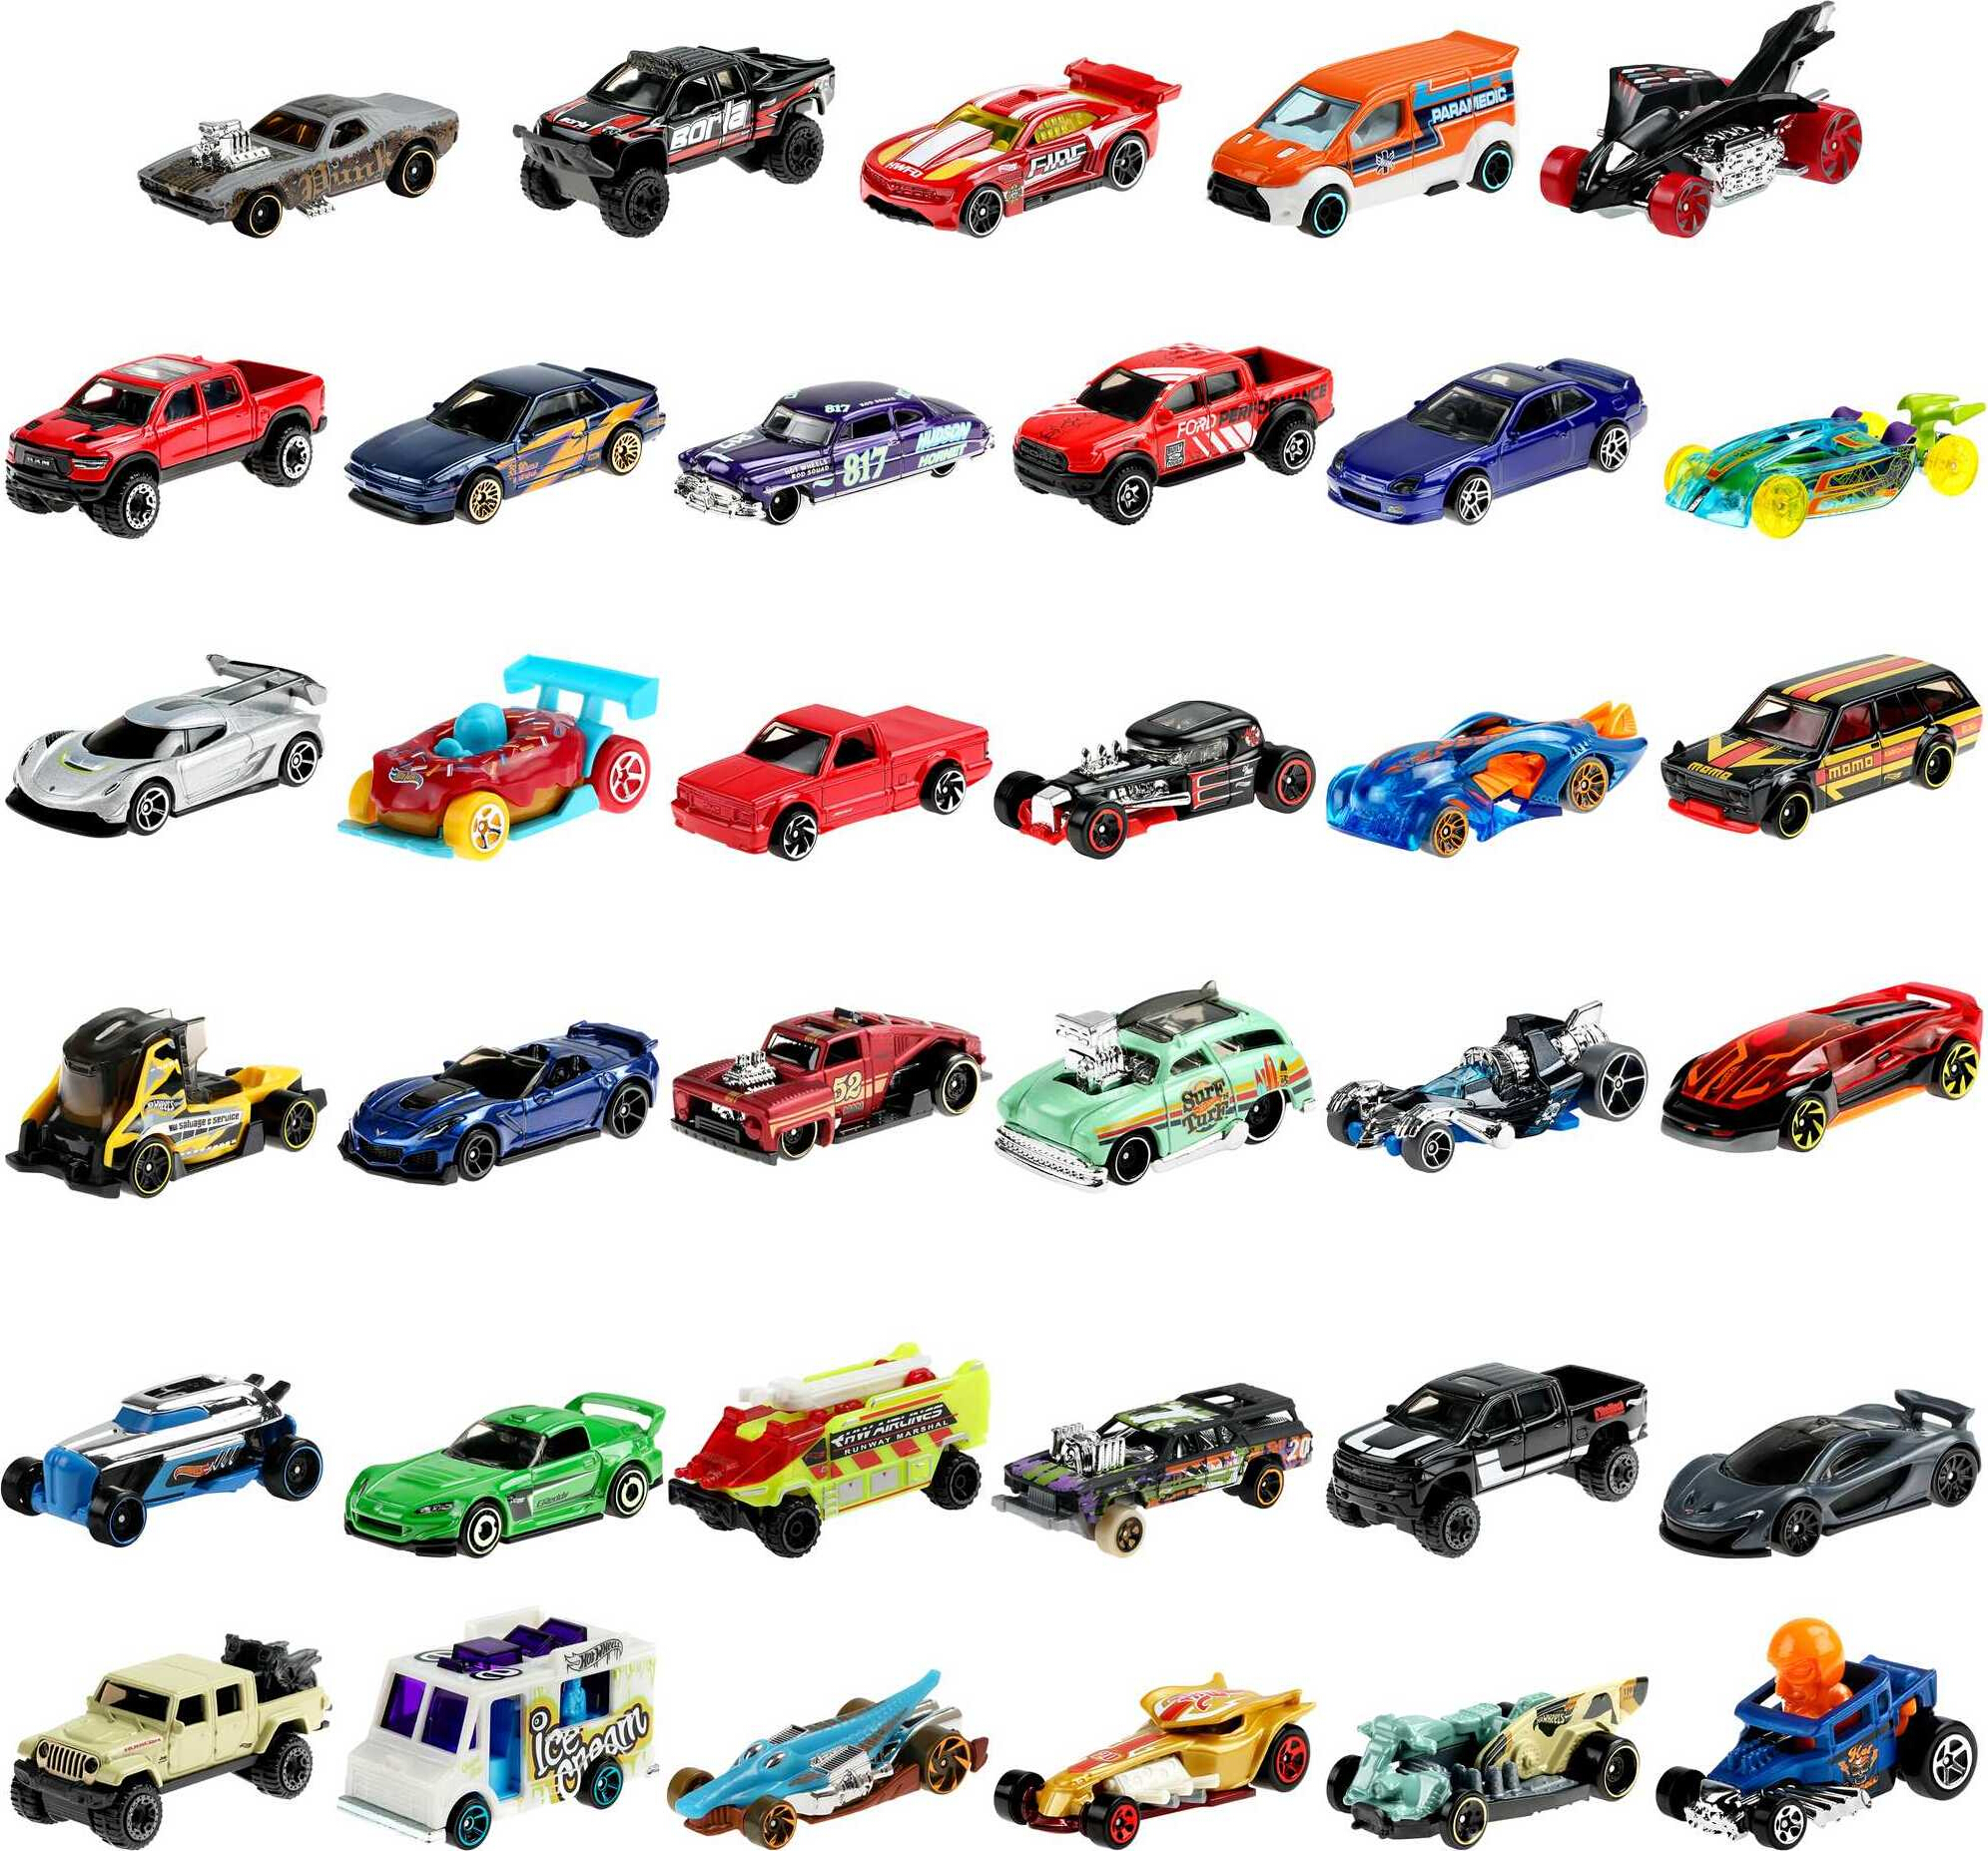 Hot Wheels 1:64 Scale Toy Cars & Trucks, 36-Pack (Styles May Vary) - image 1 of 8